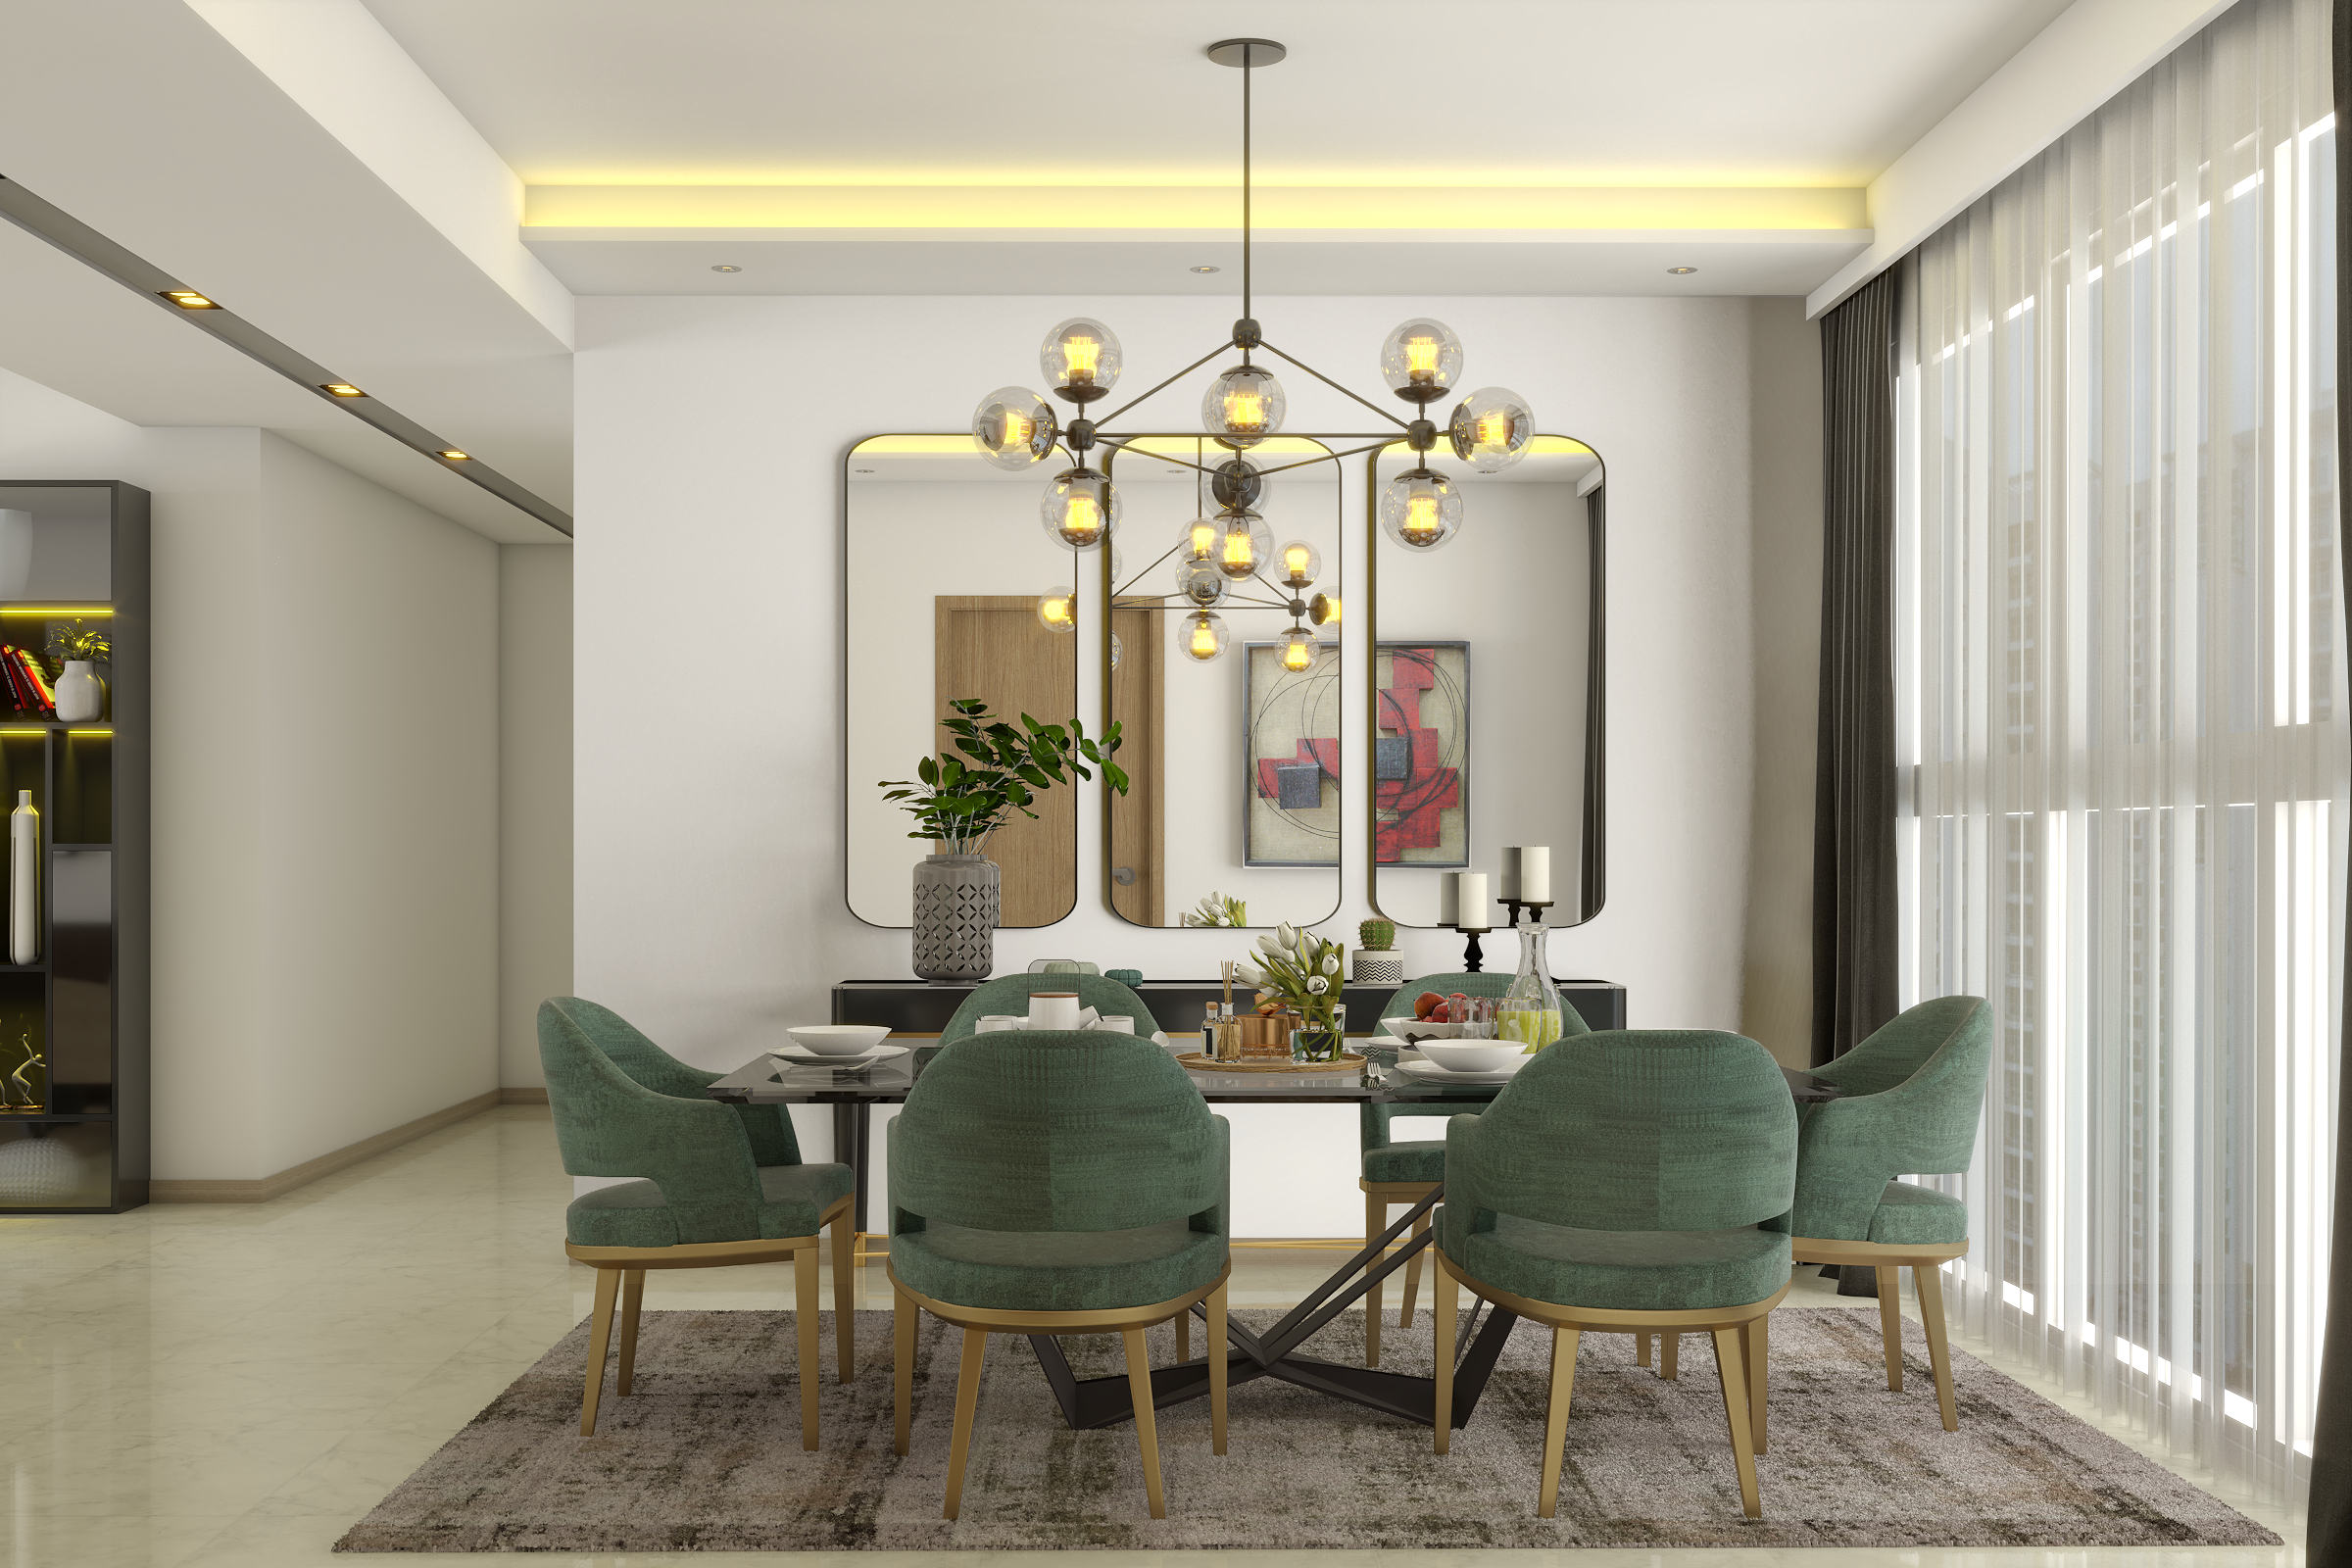 Spacious Contemporary Style Dining Hall Design With Six-Seater Dining Table